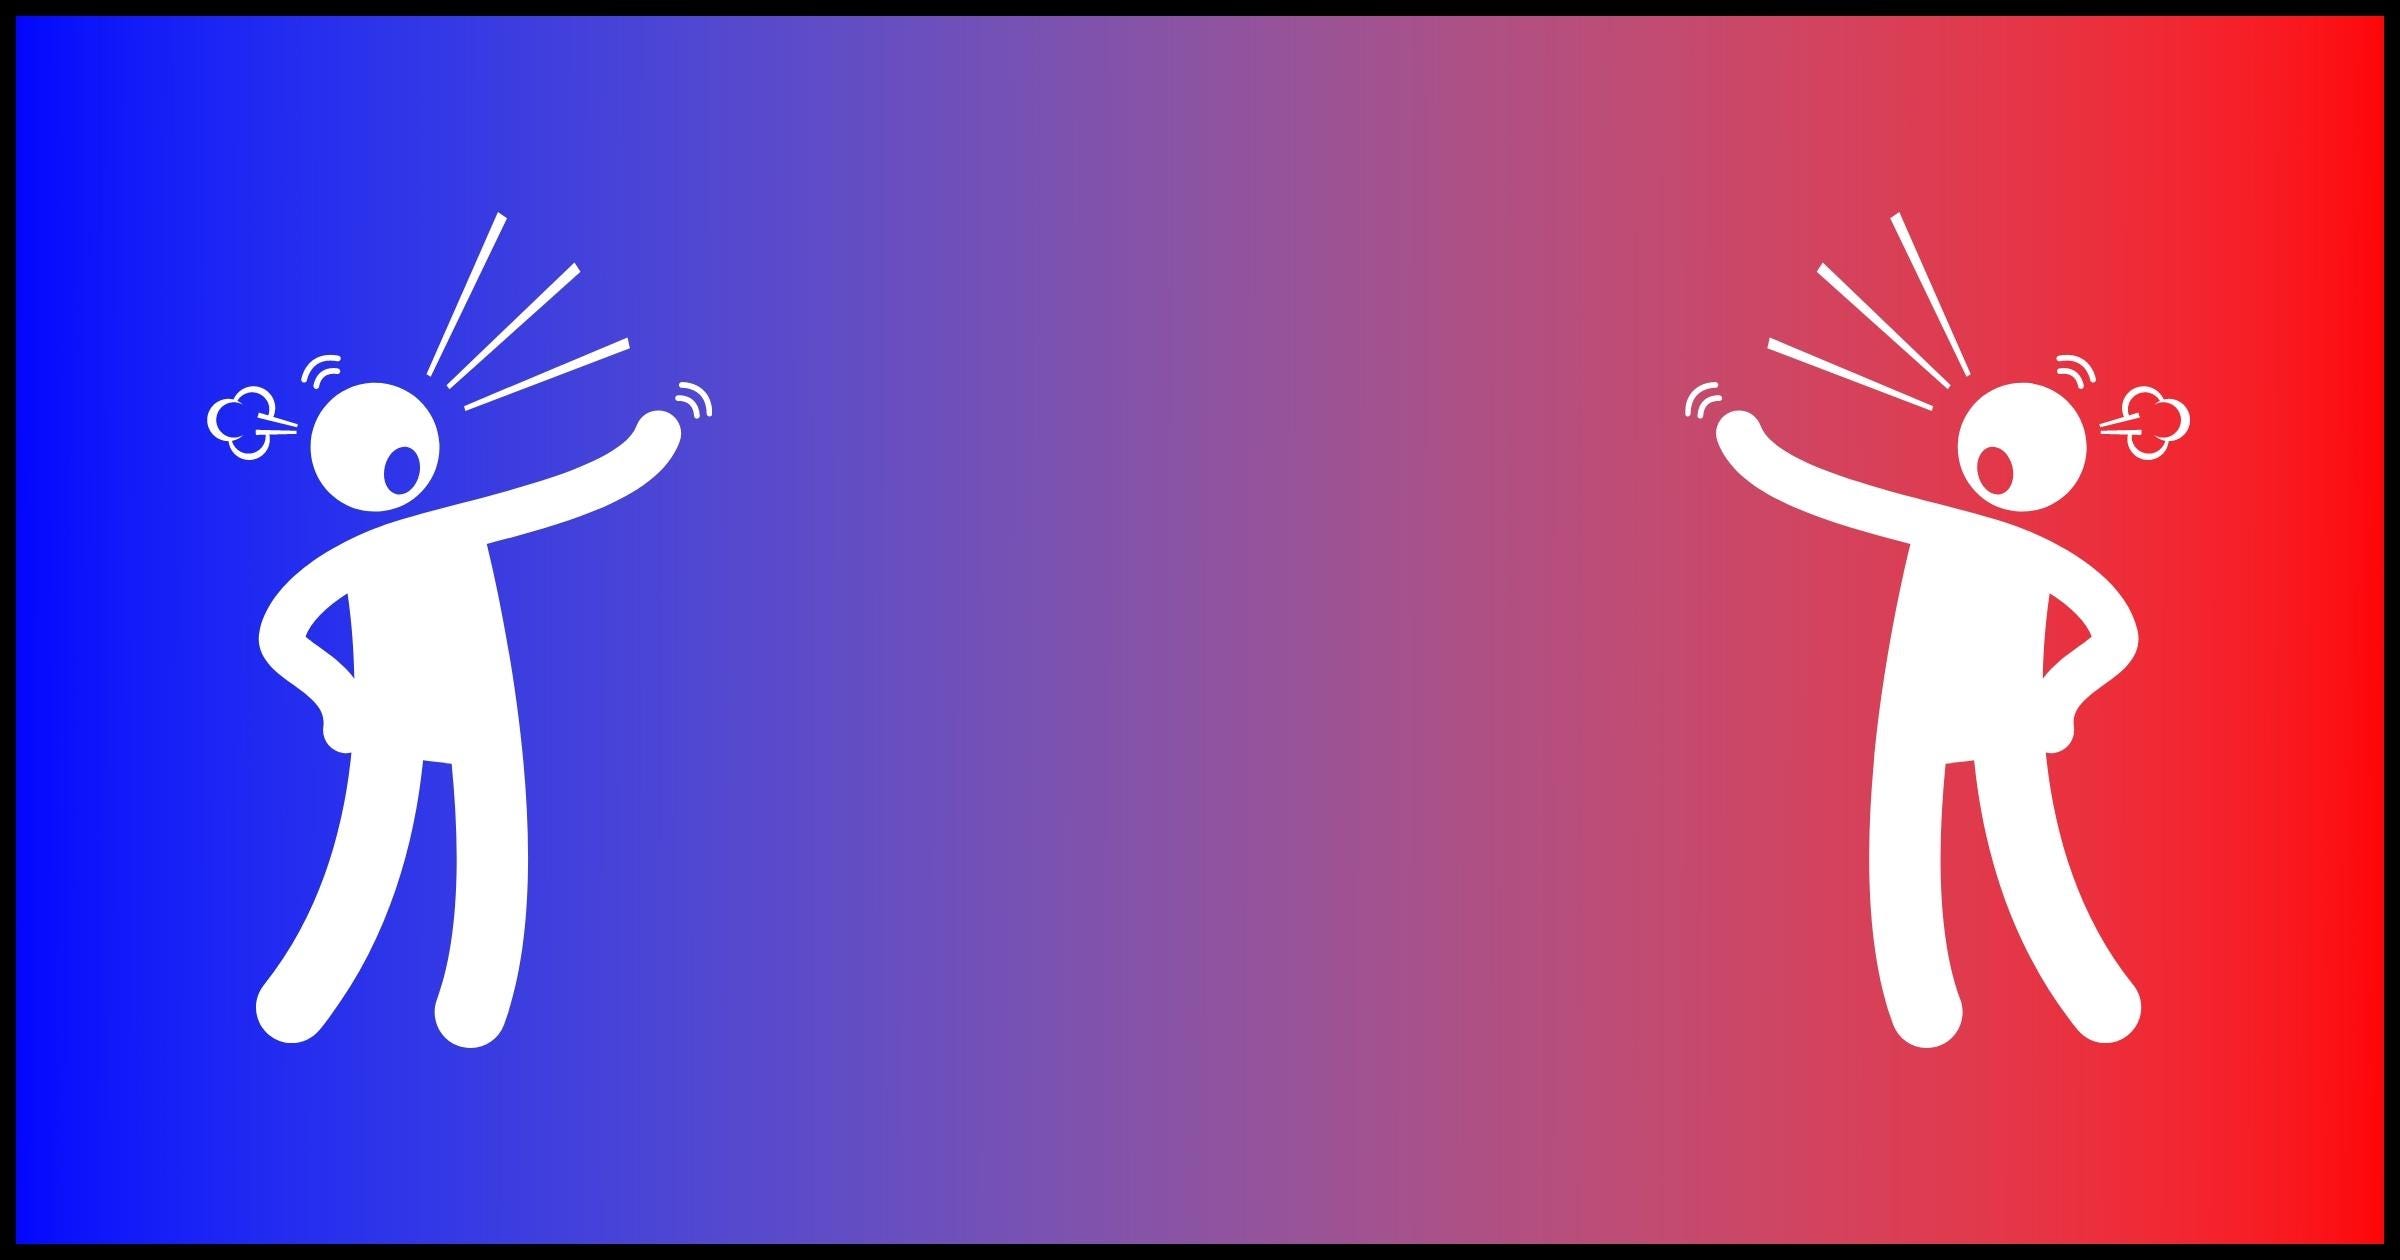 Two figures arguing at opposite ends of a blue-red gradient.